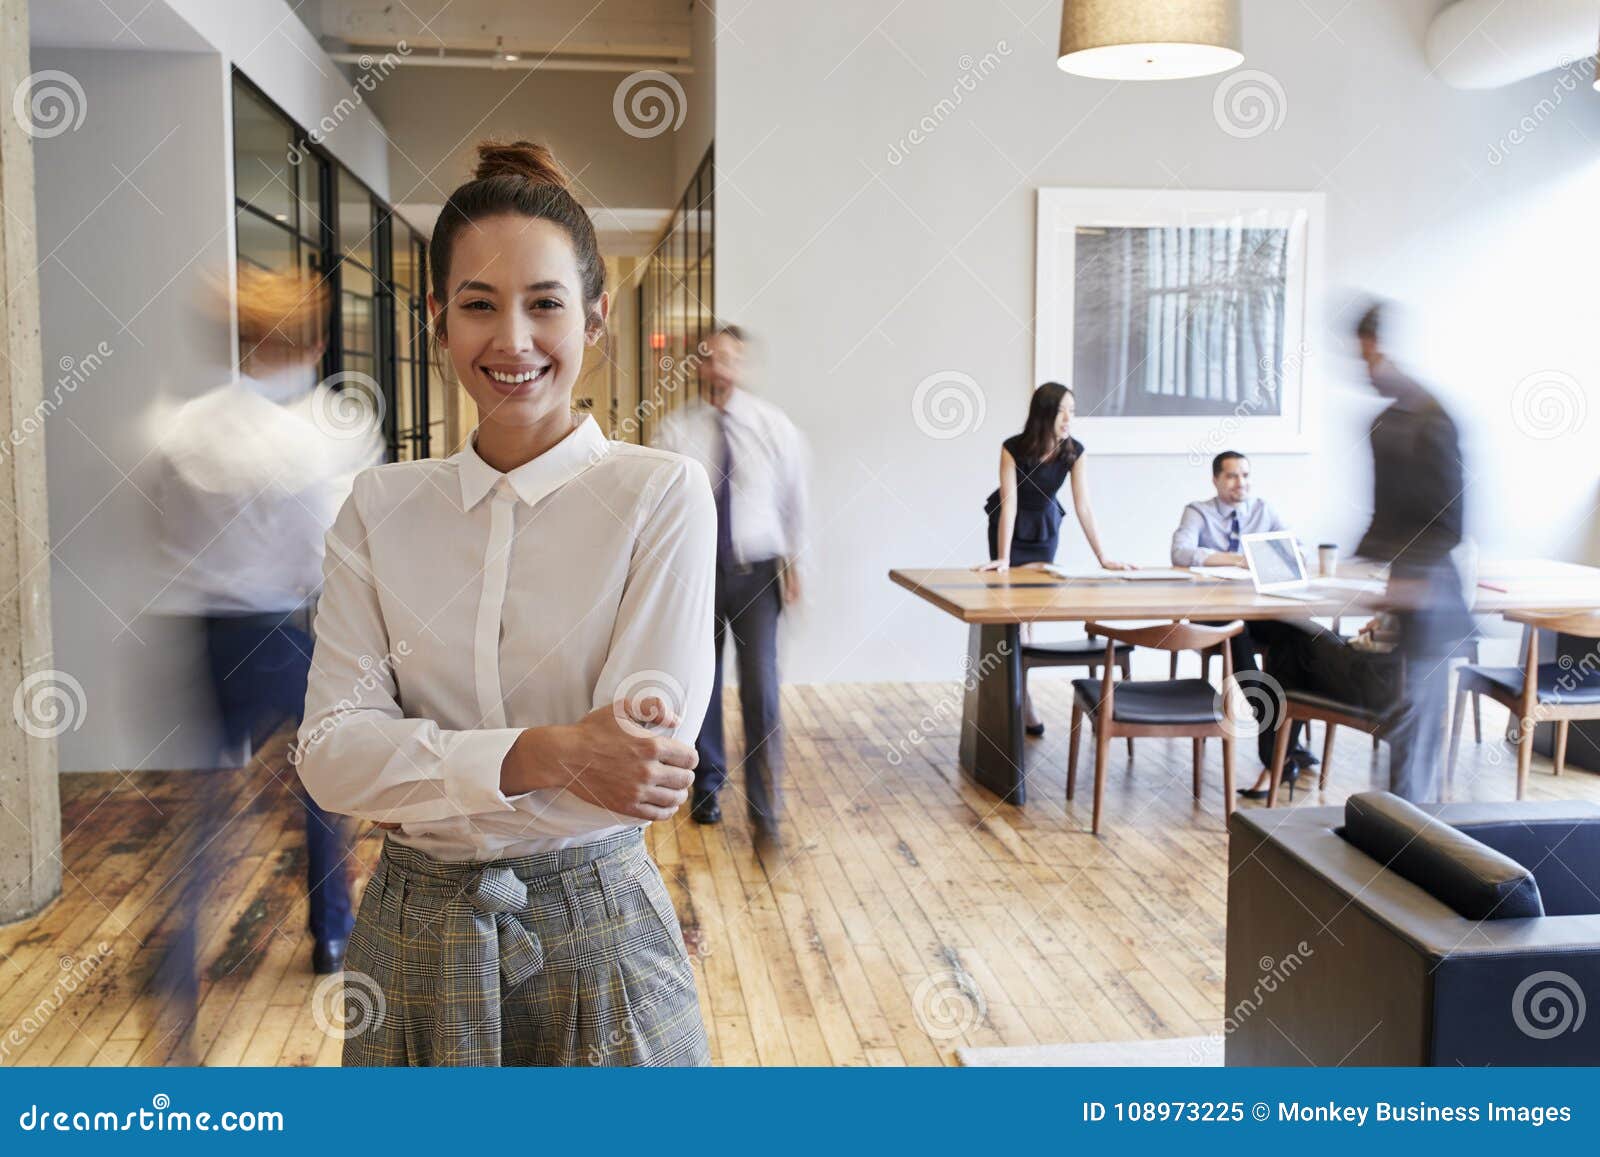 portrait of young white woman in a busy modern workplace